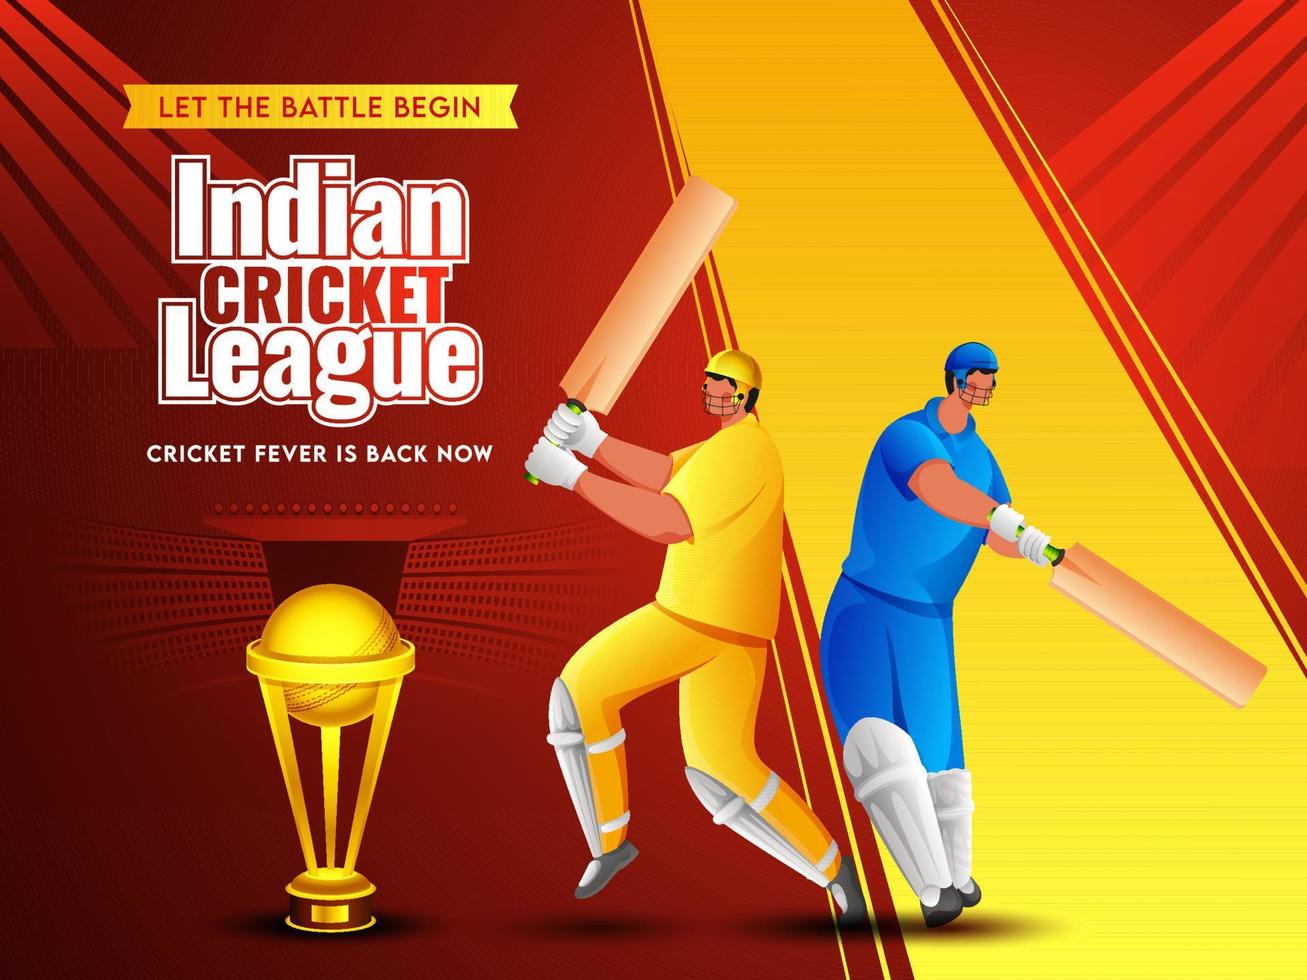 Cartoon Two Batsman Player in Different Attire with Golden Trophy Cup on Red and Yellow Stadium View Background for Indian Cricket League. vector